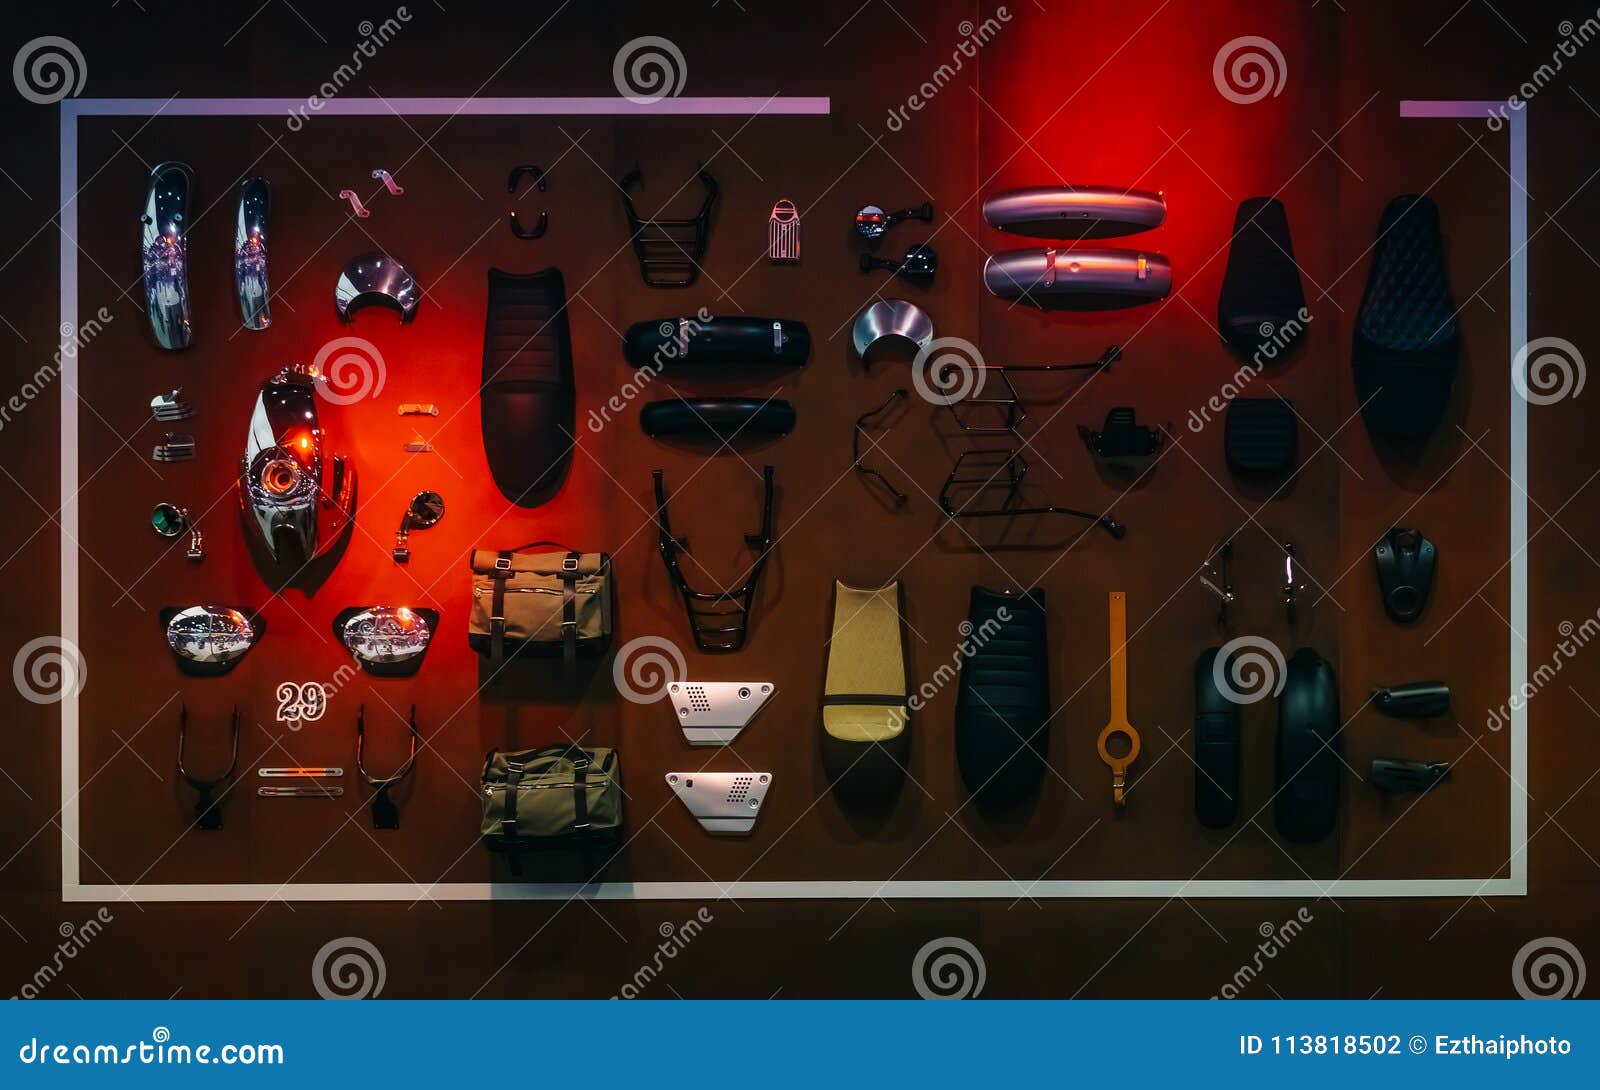 display of motorcycle accessories and spare parts arrangement h